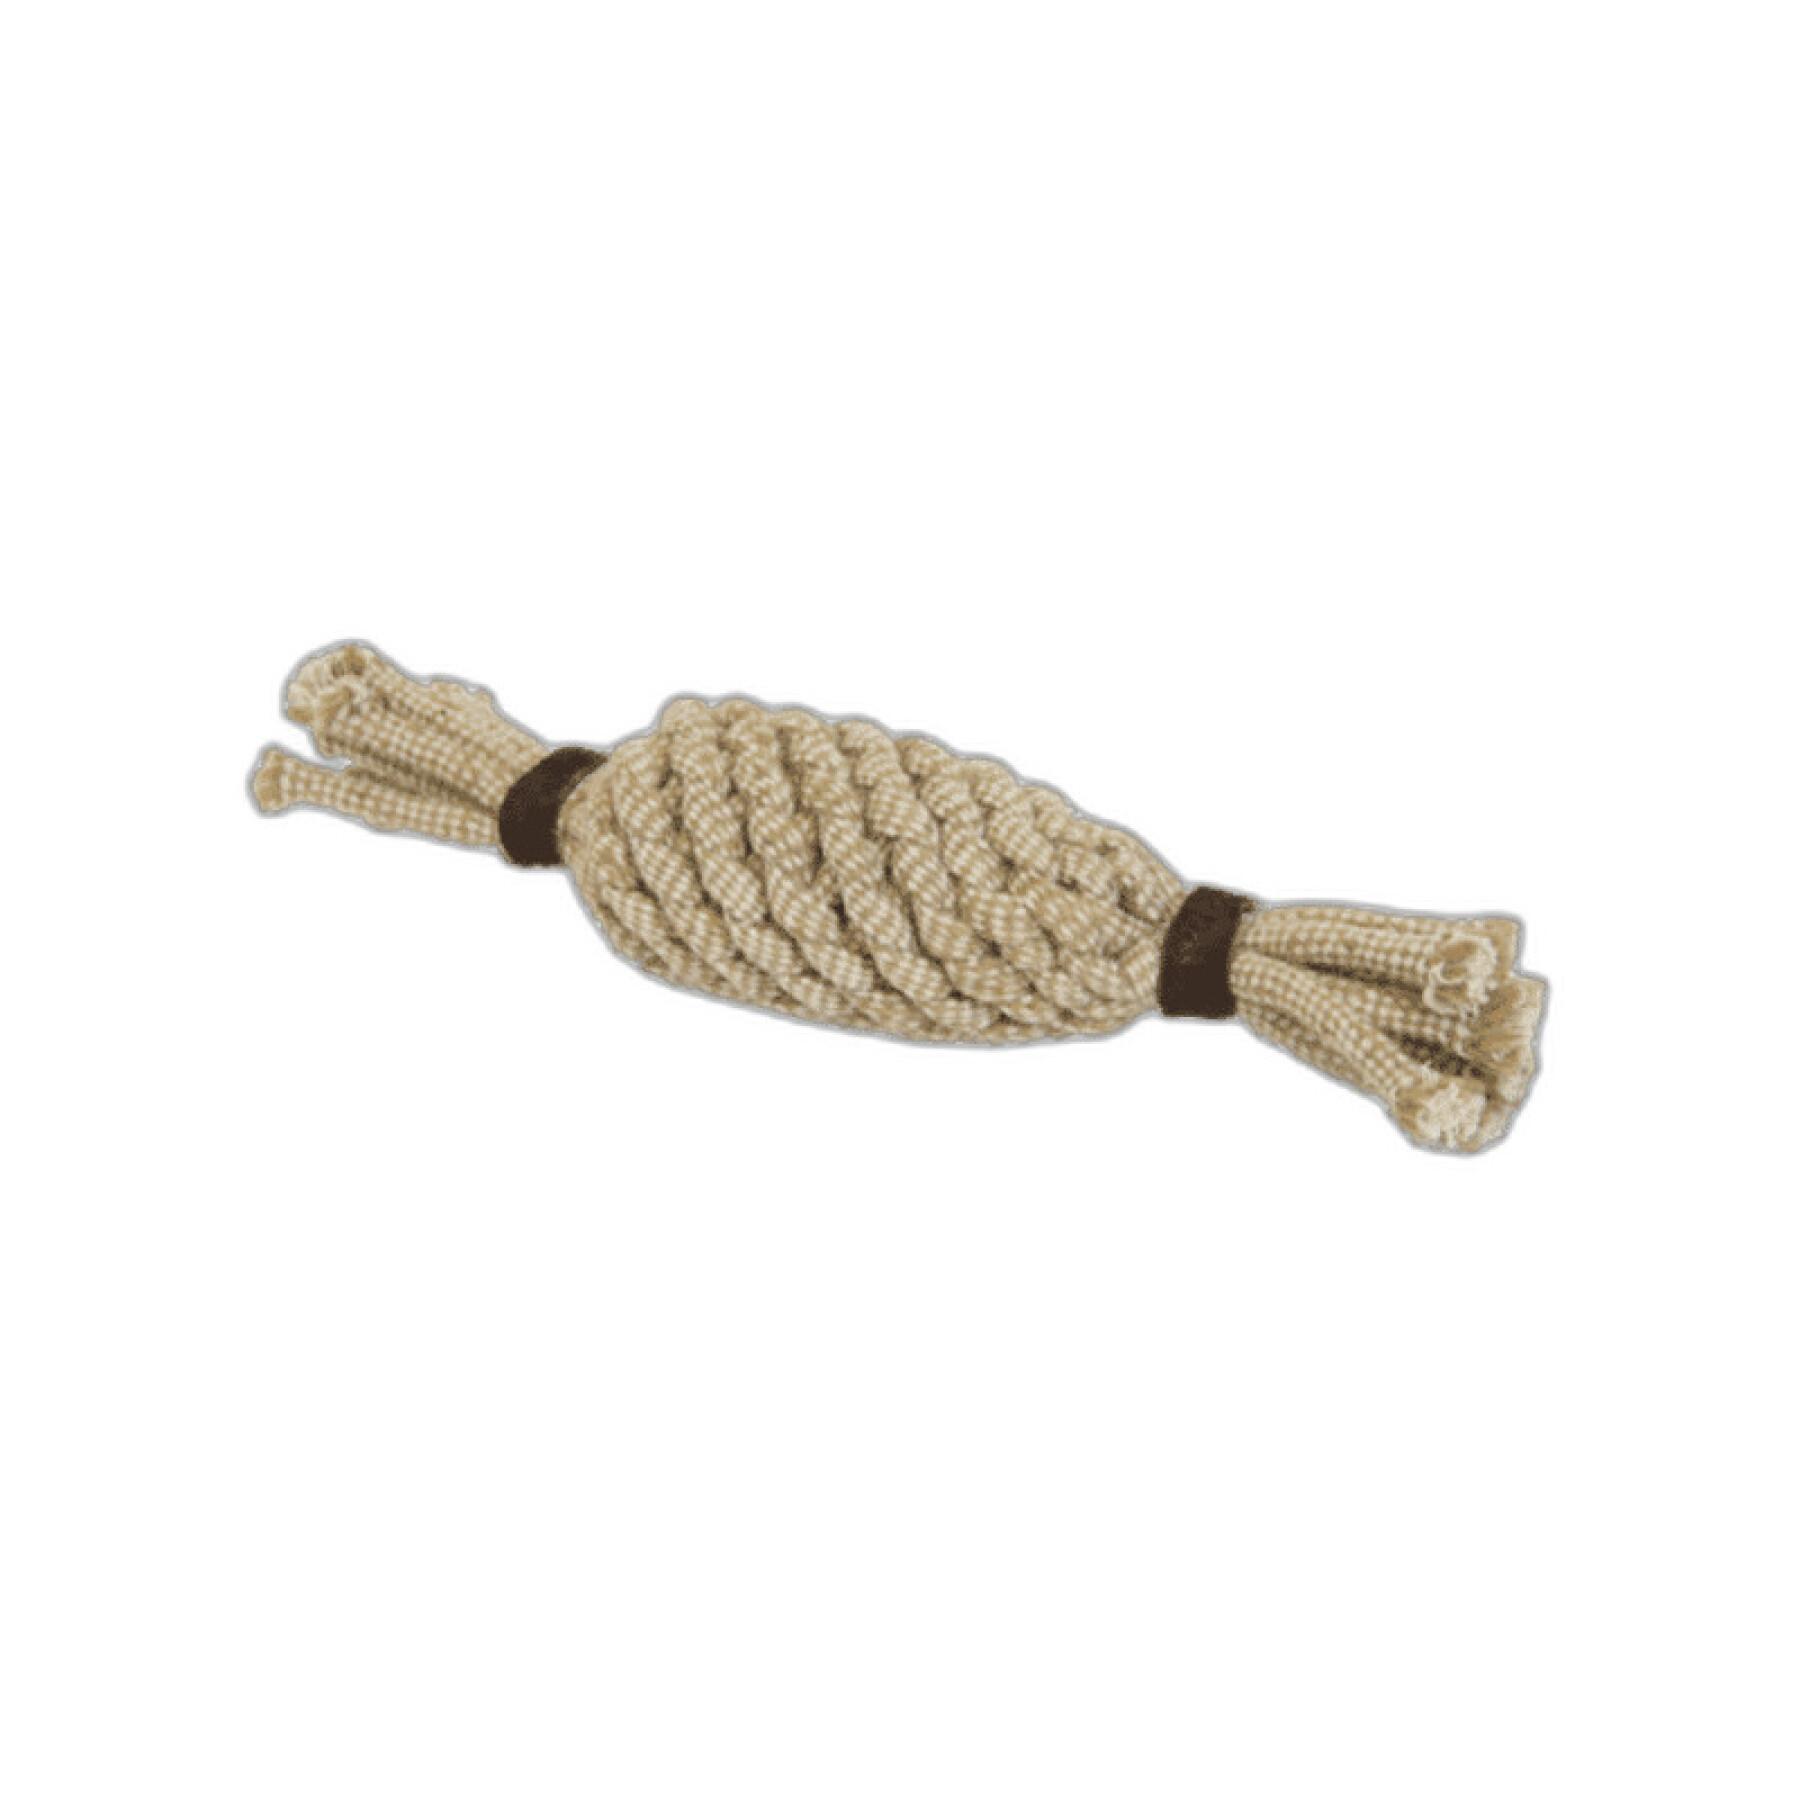 Pineapple cotton rope dog toy Kentucky